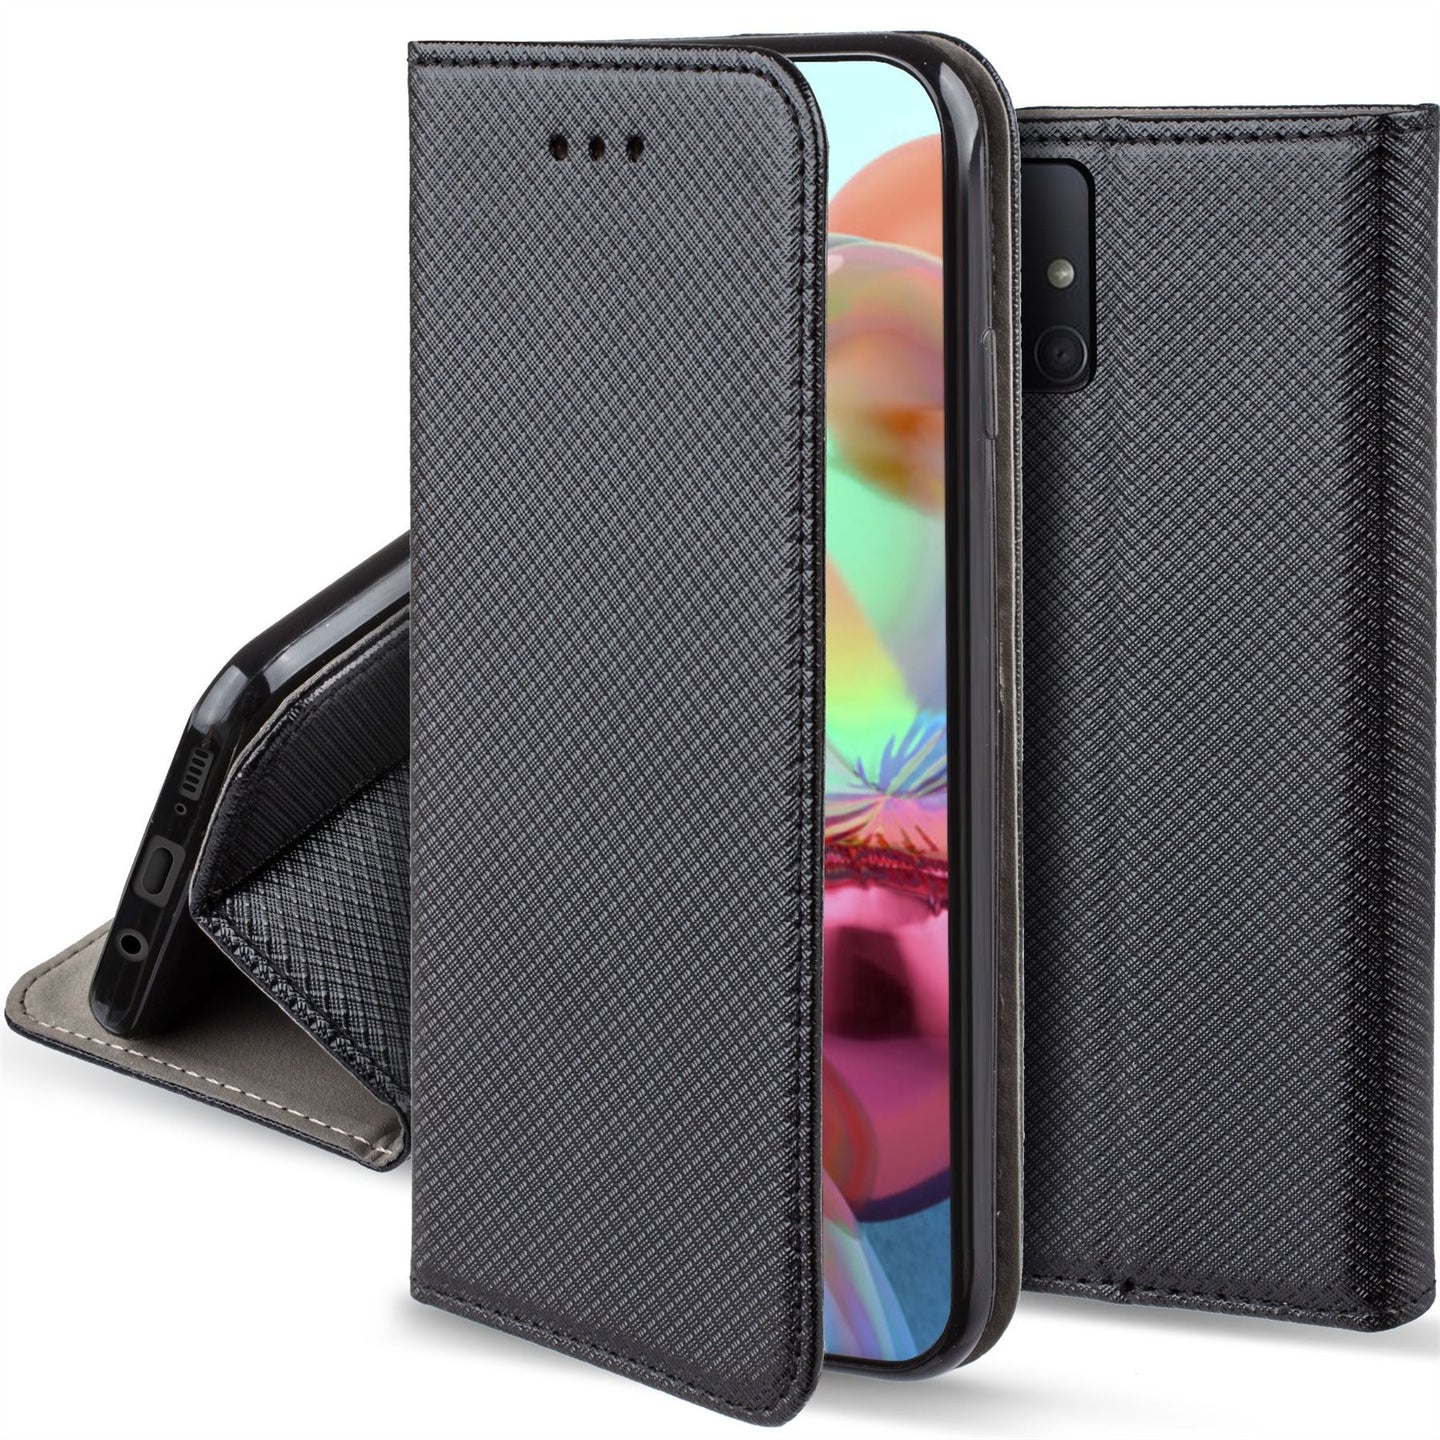 Moozy Case Flip Cover for Samsung A71, Black - Smart Magnetic Flip Case with Card Holder and Stand